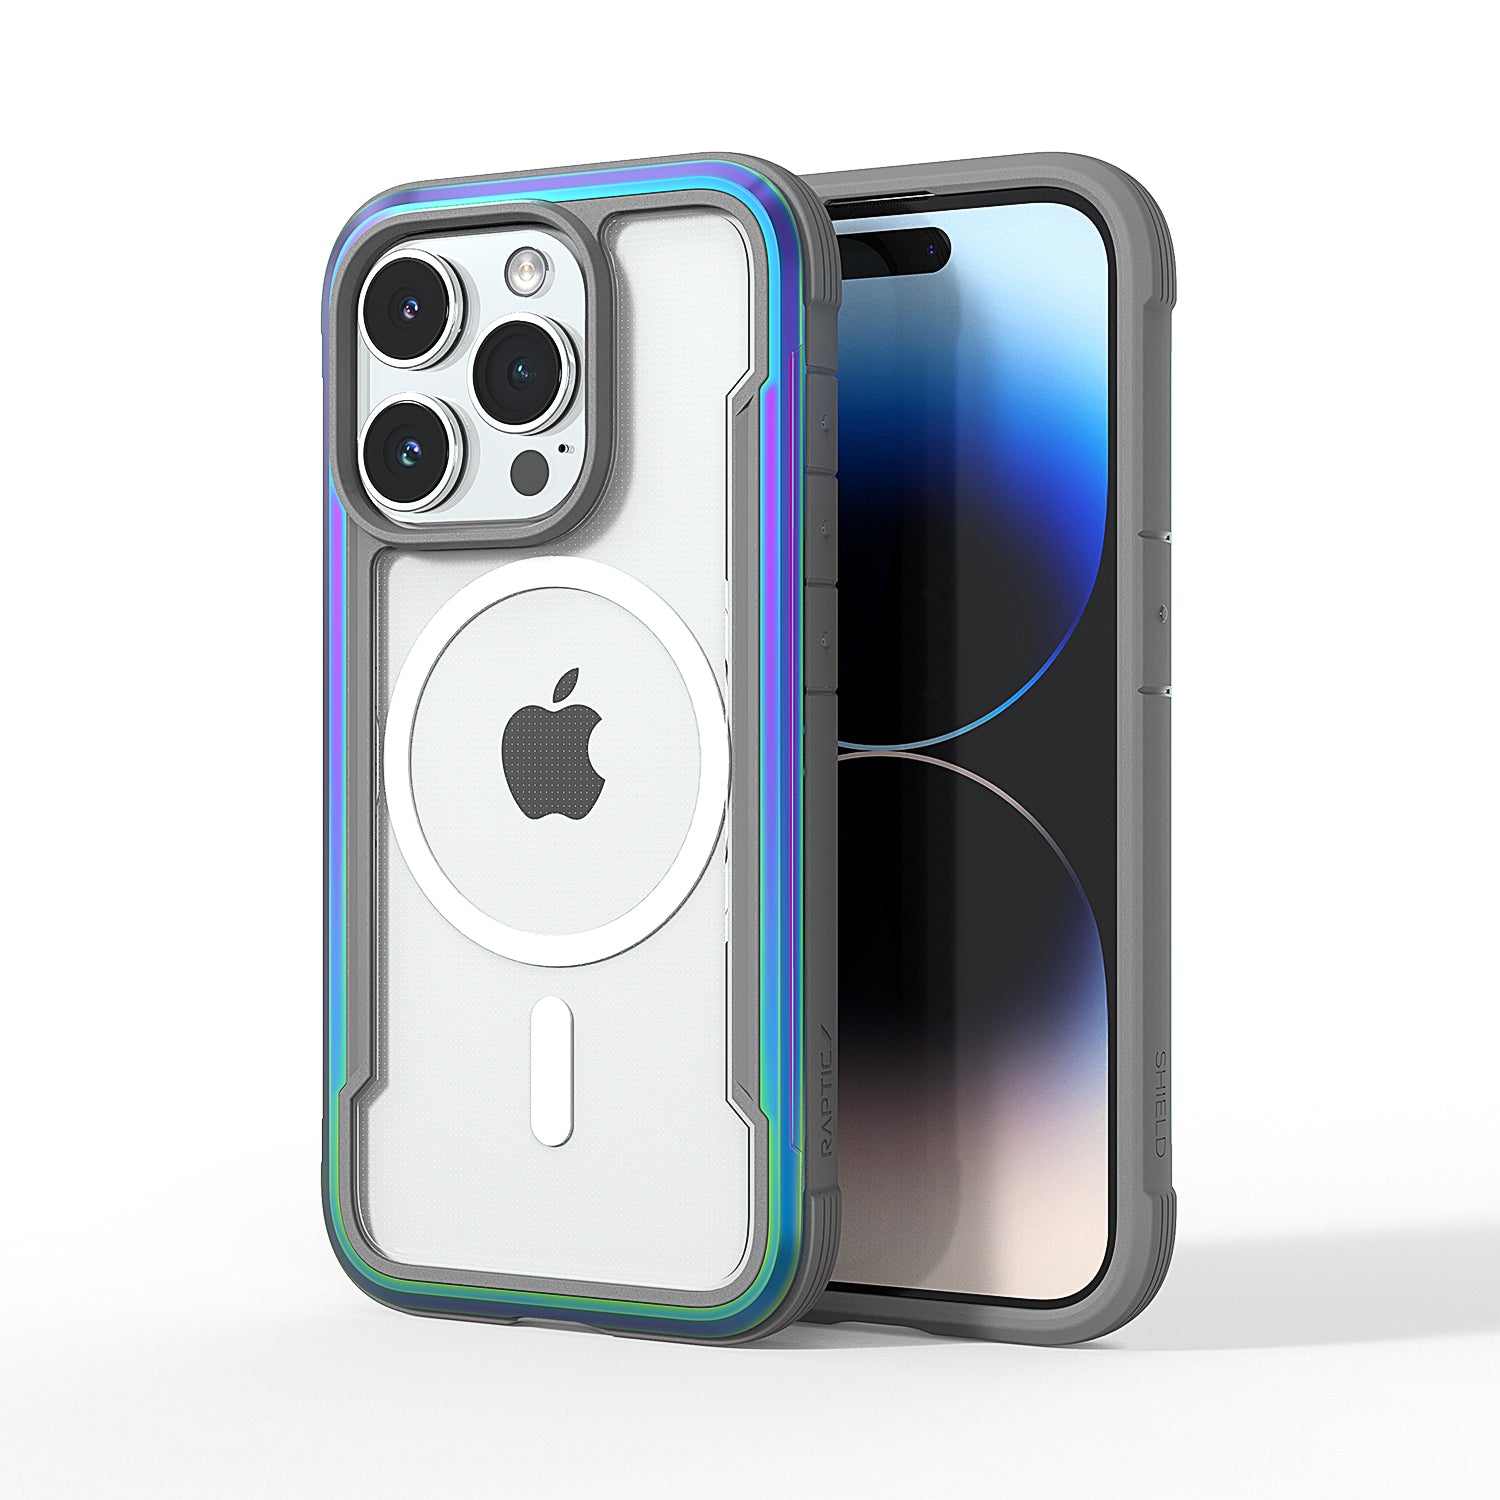 Transparent ProMagnet iPhone 15 MagSafe Shield case by Raptic on an iPhone with MagSafe compatibility, featuring reinforced corners and visible internal cushioning.